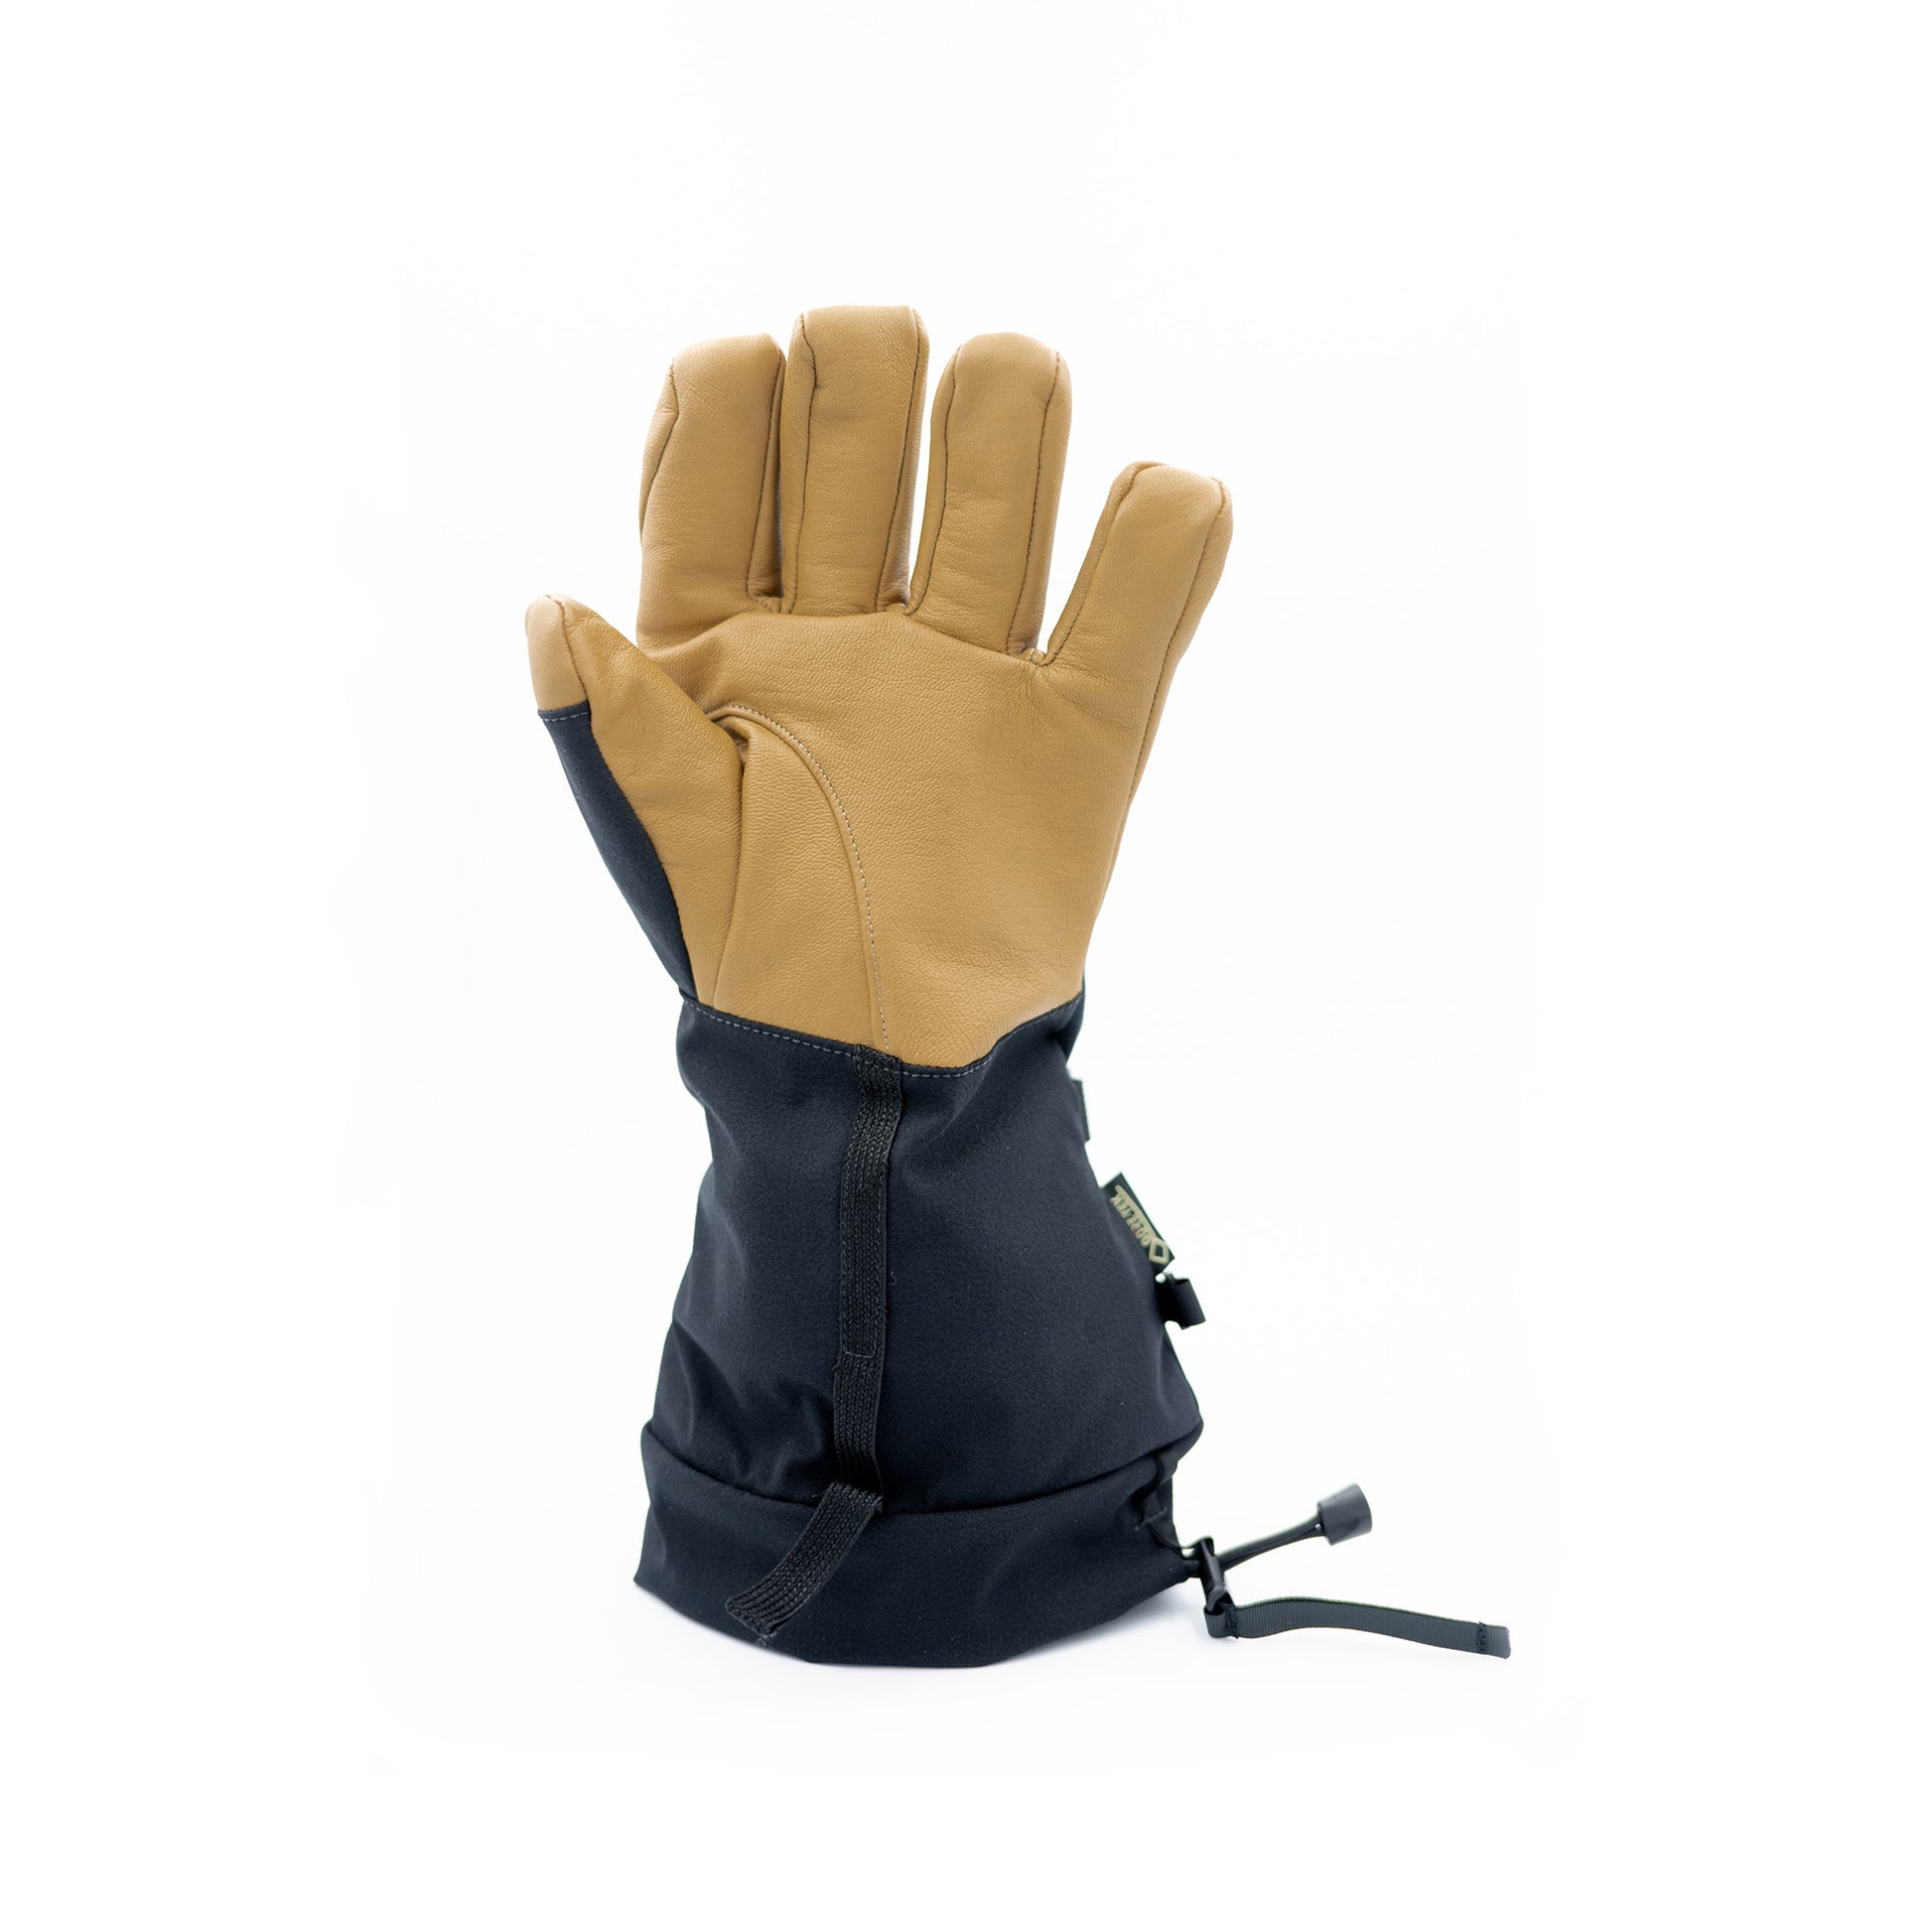 A pair of black and tan Mainers Rangeley gloves on a white background.